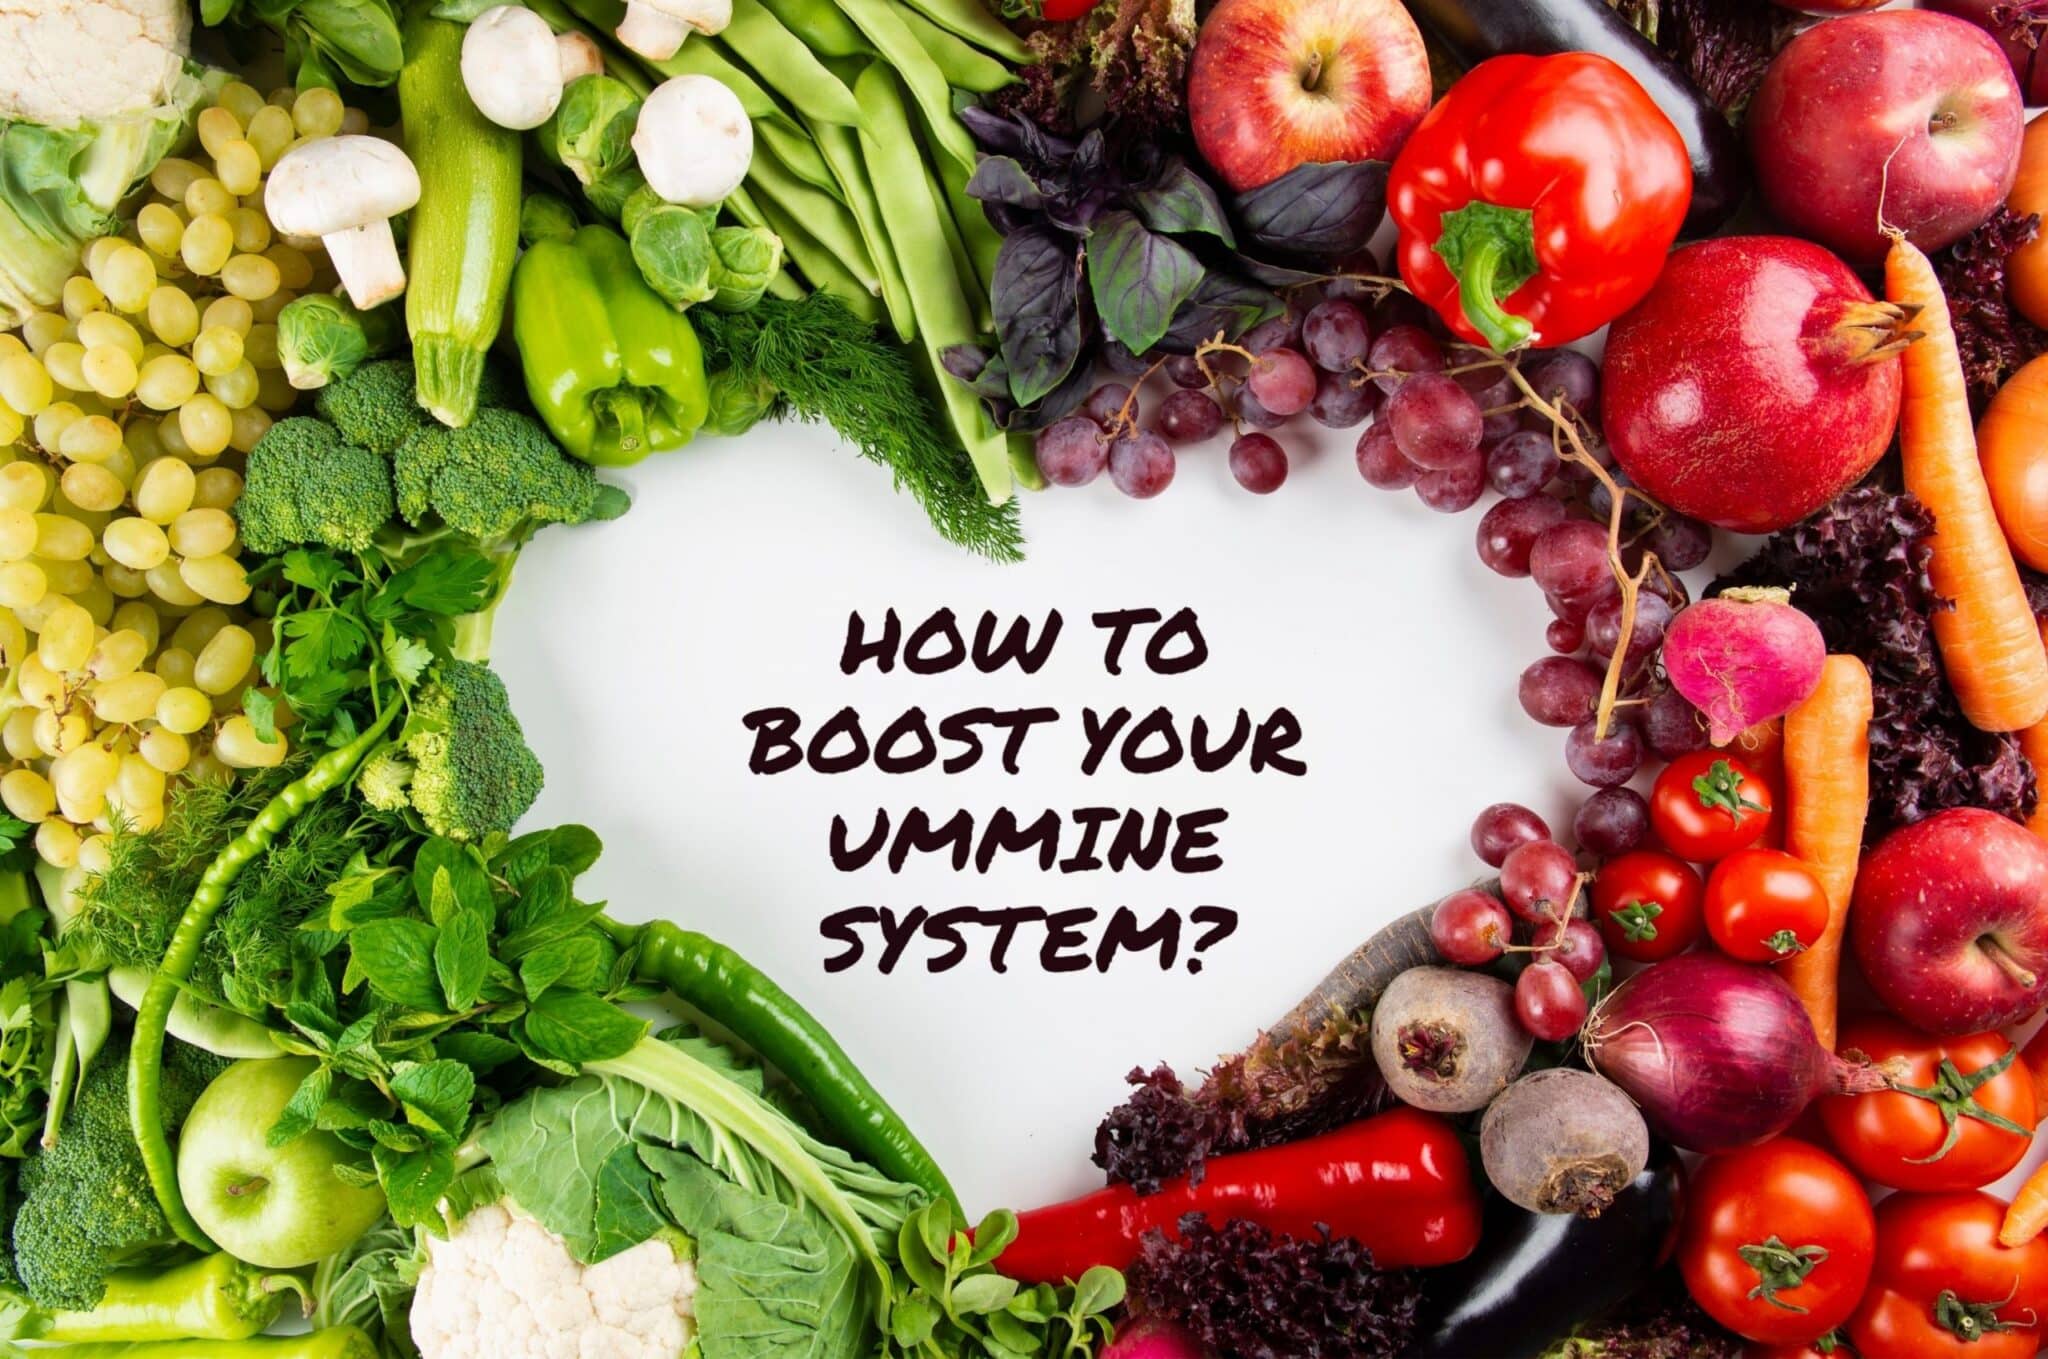 How to Boost your Immune System Fast?